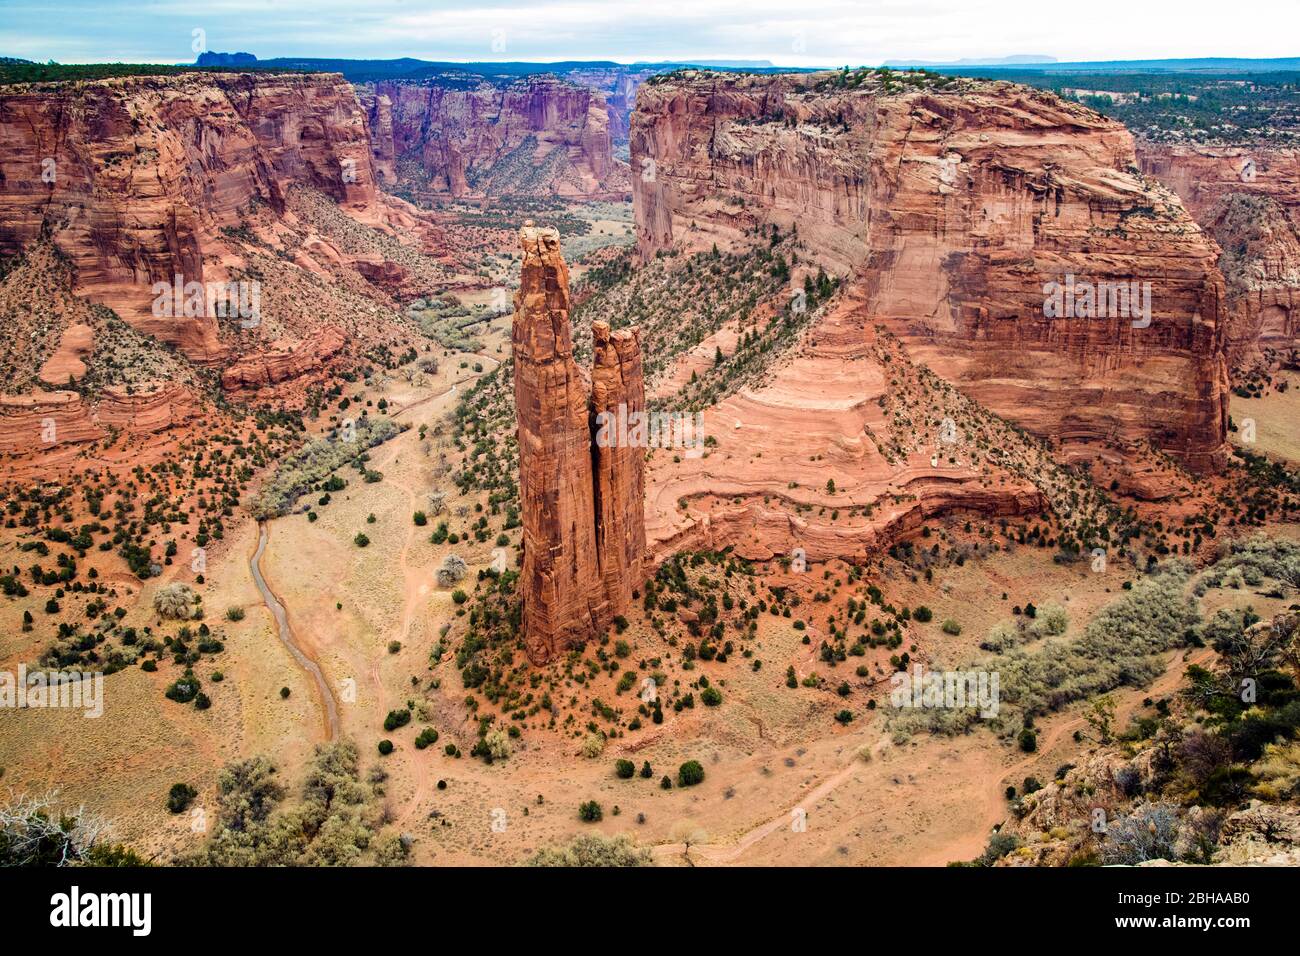 Aerial view of Spider Rock Canyon de Chelly National Monument, Utah, USA Stock Photo